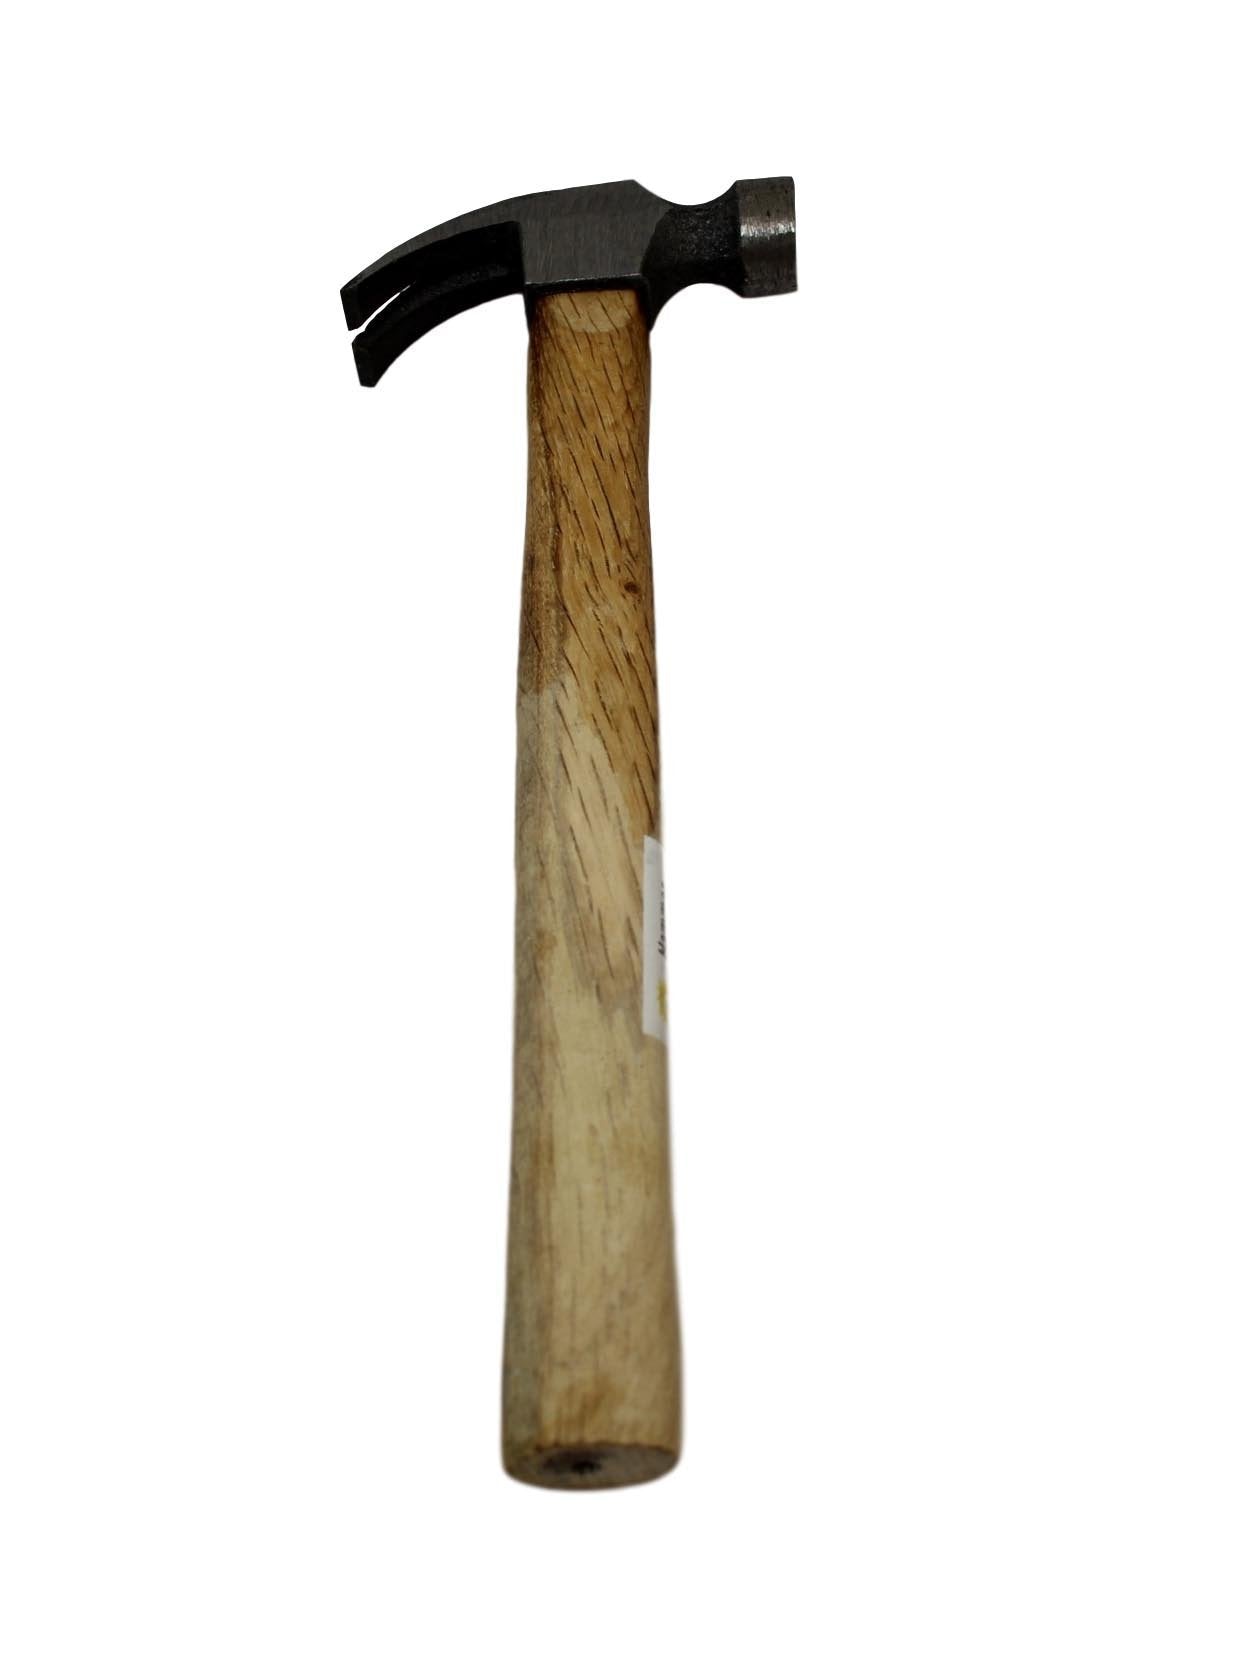 Wooden Big Hammer With Metal Top And Curve DIY General Use Hammer